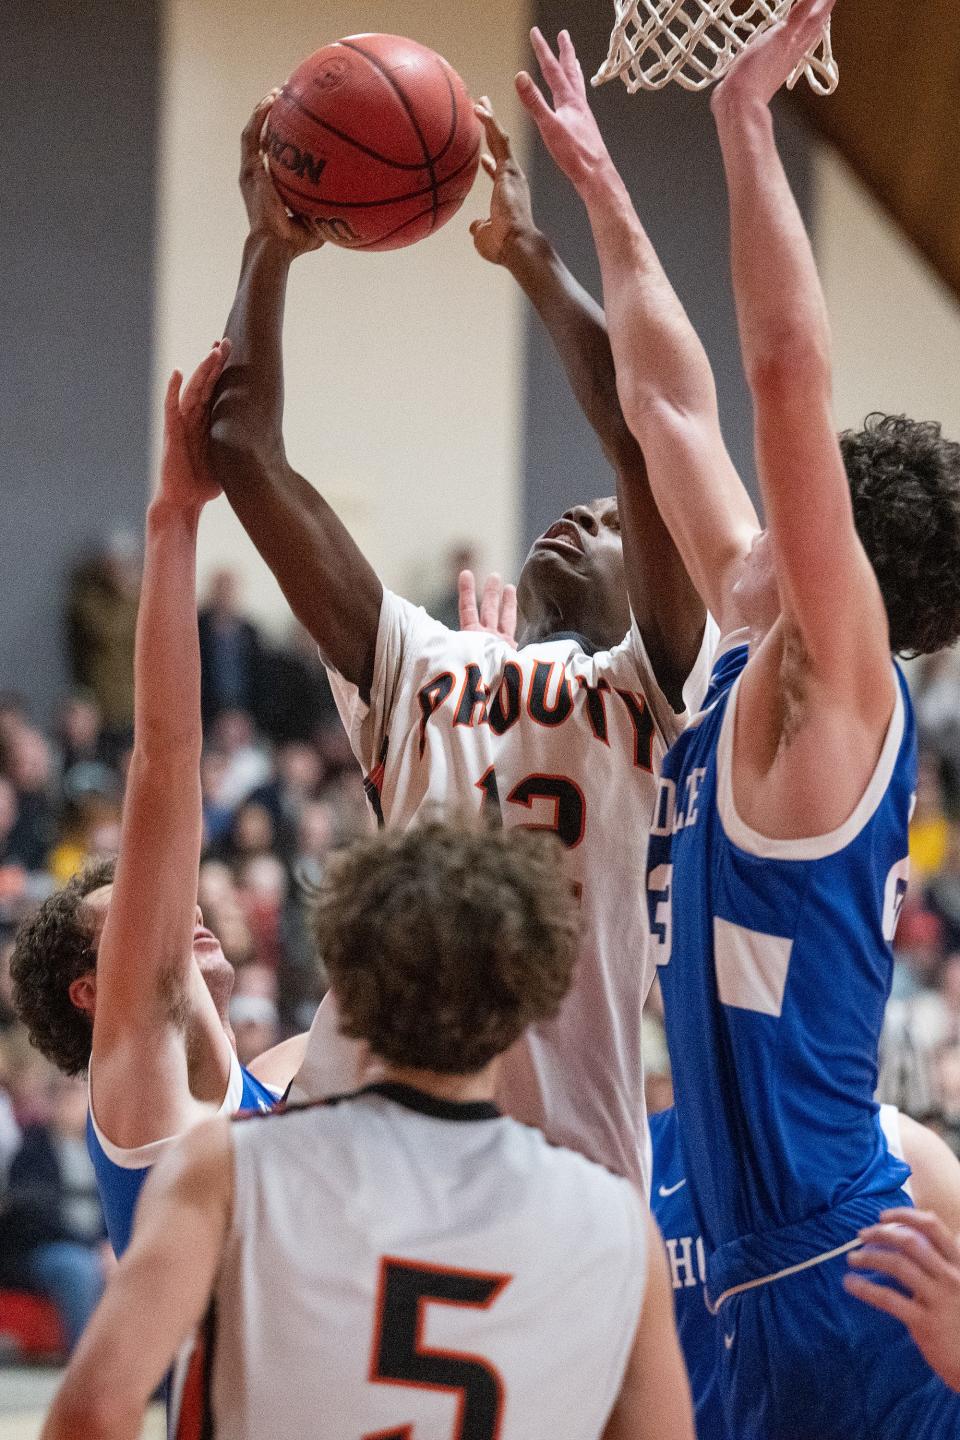 David Prouty's Judelius Neiray makes a shot to take the lead over Hopedale, 51-49, in the second overtime.